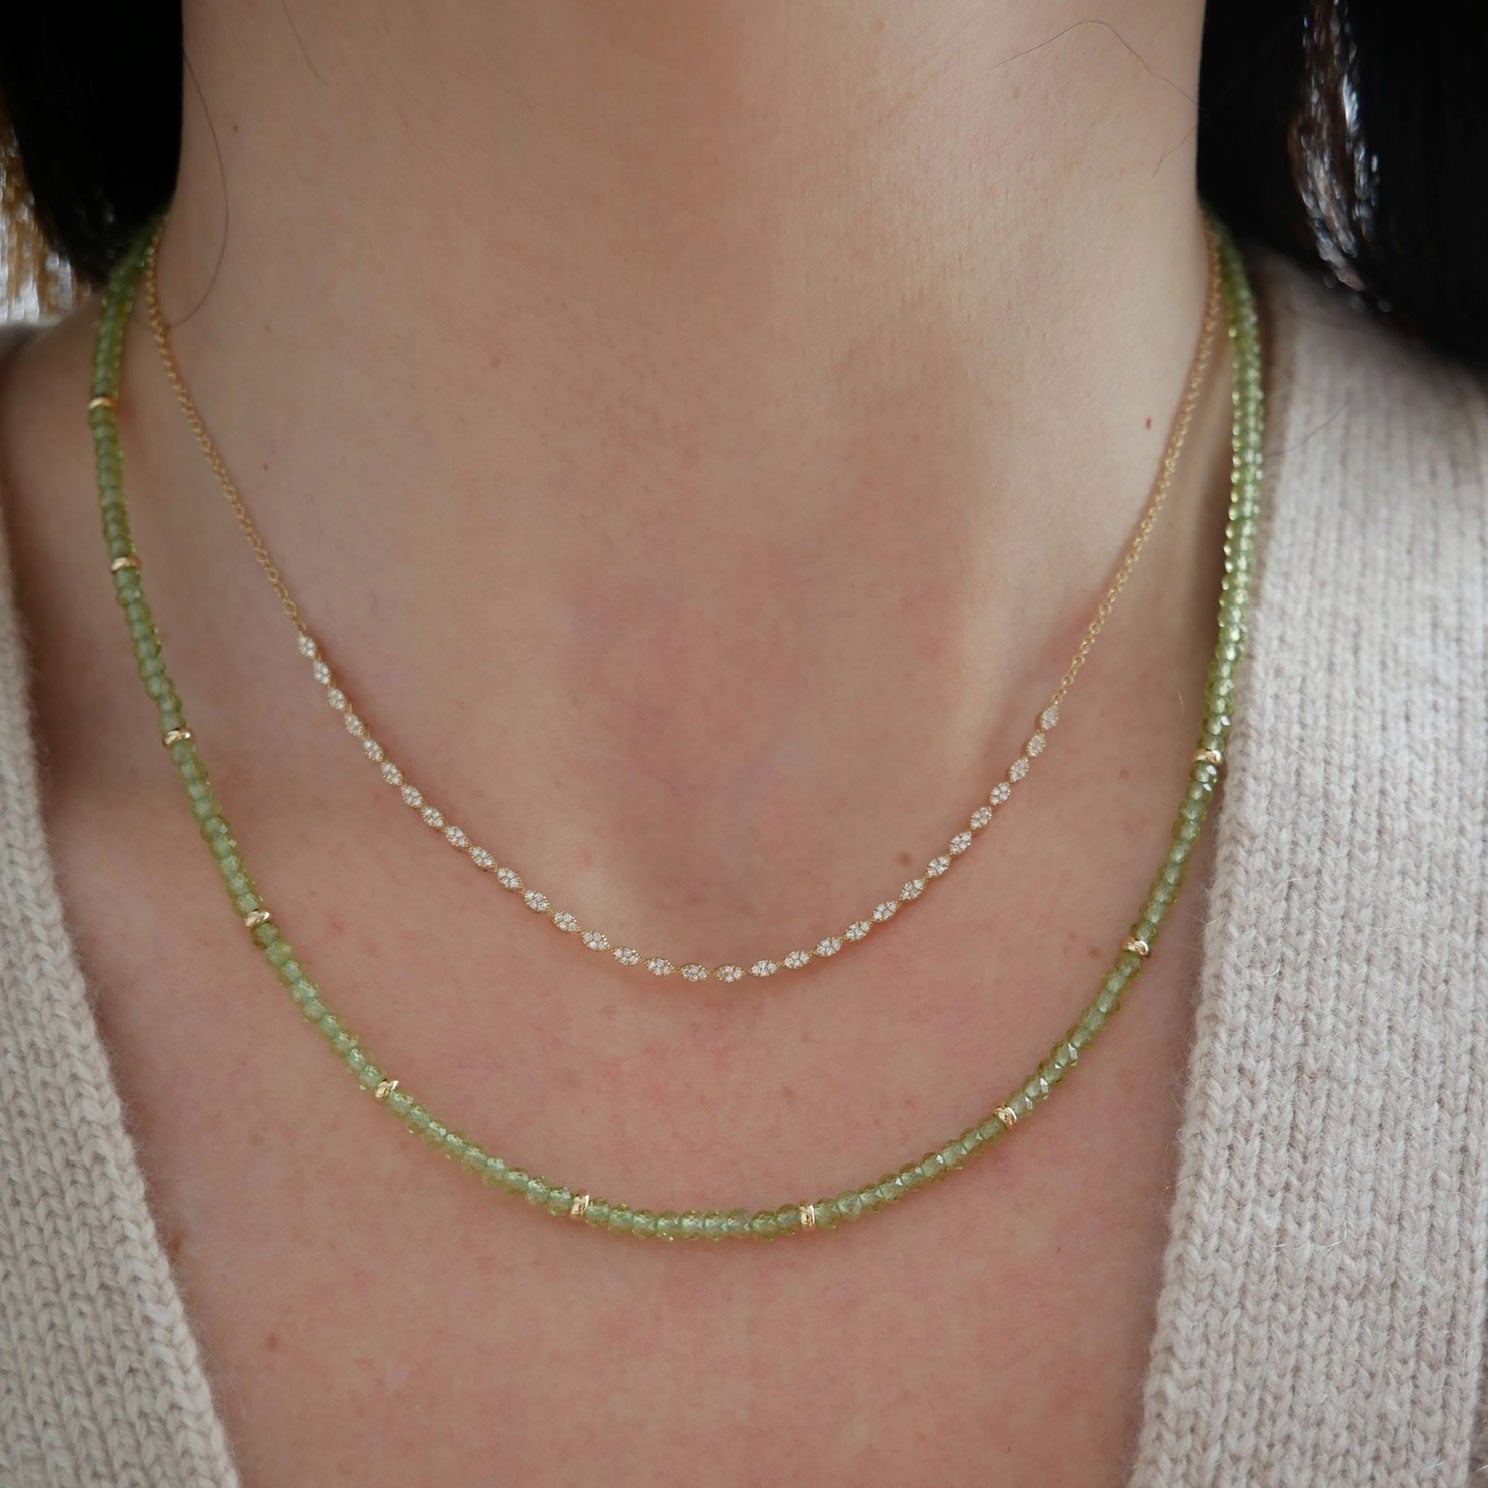 Birthstone Bead Necklace In Peridot styled on neck of model